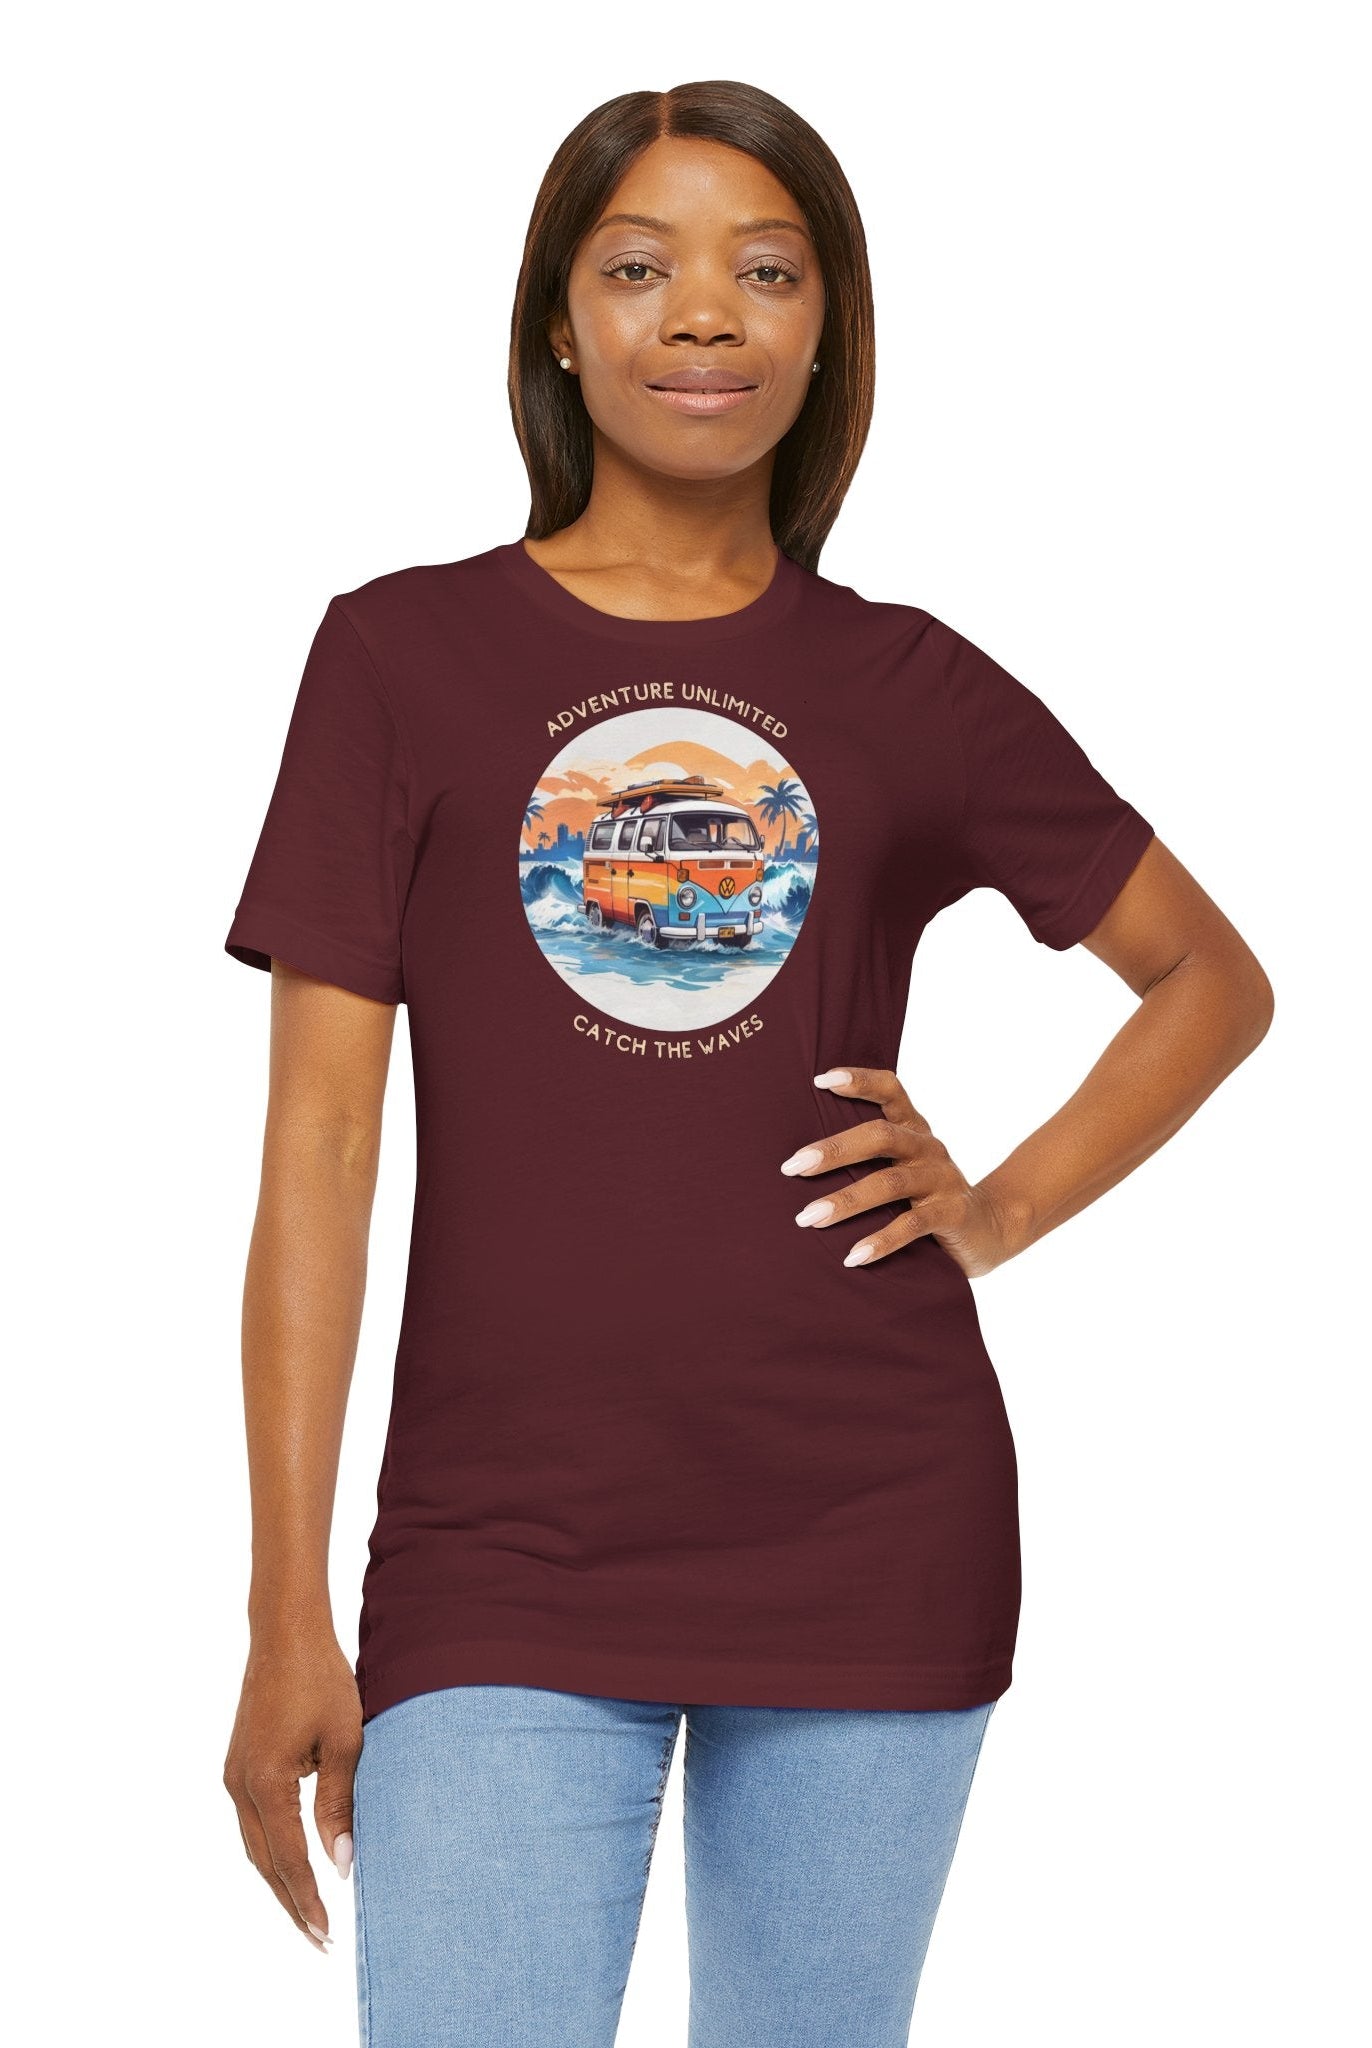 Woman wearing maroon Adventure Unlimited Surfing T-Shirt with ’Soulshinecreators’ printed on it